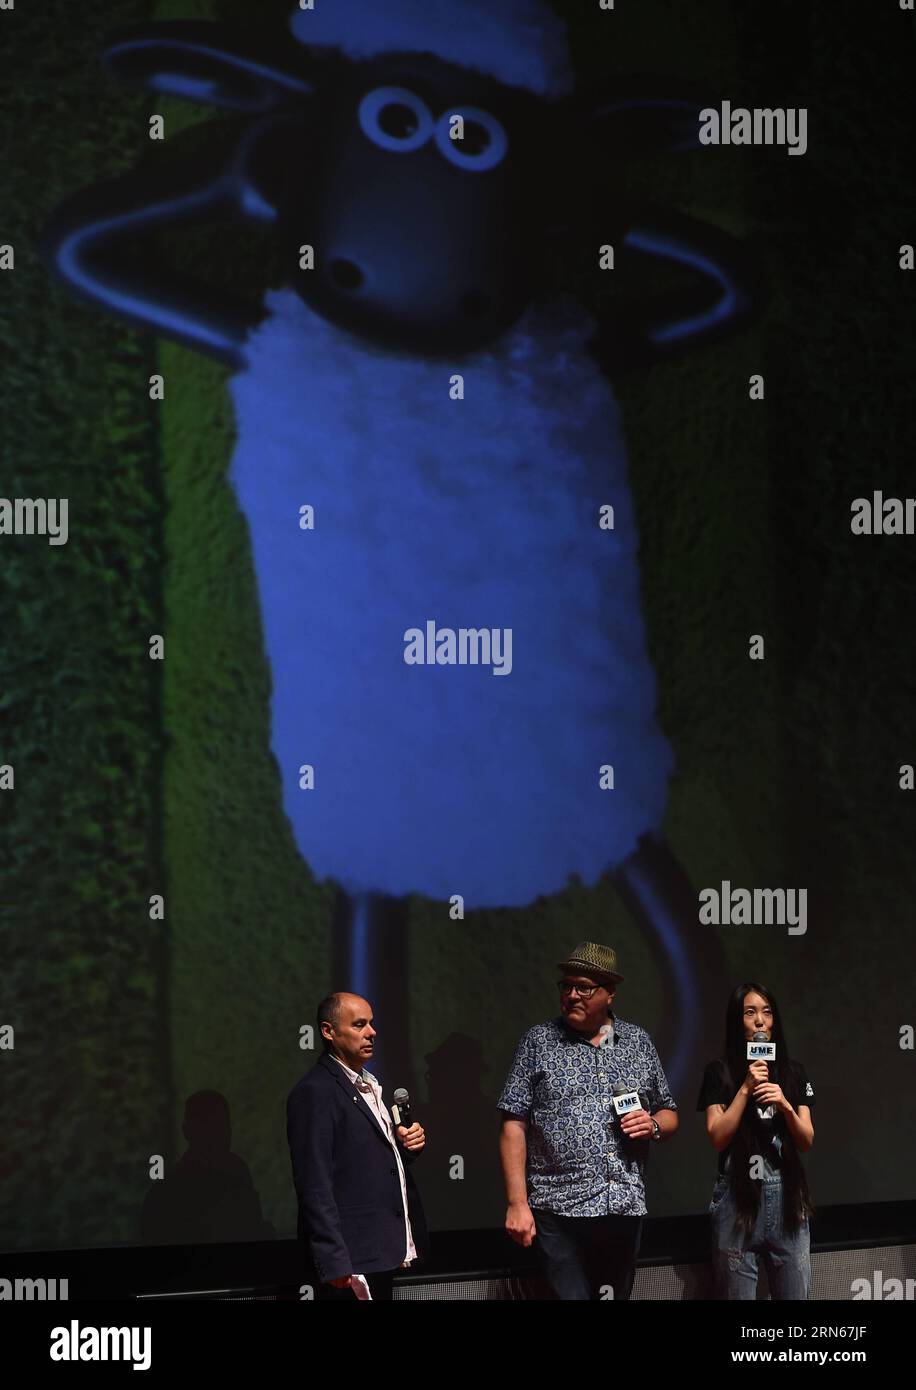 (150714) -- BEIJING, July 14, 2015 -- Richard Starzak (C) and Mark Burton (L), Directors of movie Shaun the Sheep, attends the premiere in Beijing, Capital of China, July 14, 2015. The film is part of the program of Sino-U.K. Year of Cultural Exchange and will be on Chinese screens from July 17. ) (dhf) CHINA-BEIJING-SHAUN THE SHEEP-PREMIERE (CN) JinxLiangkuai PUBLICATIONxNOTxINxCHN   150714 Beijing July 14 2015 Richard Starzak C and Mark Burton l Directors of Movie Shaun The Sheep Attends The Premiere in Beijing Capital of China July 14 2015 The Film IS Part of The Program of SINO U K Year of Stock Photo